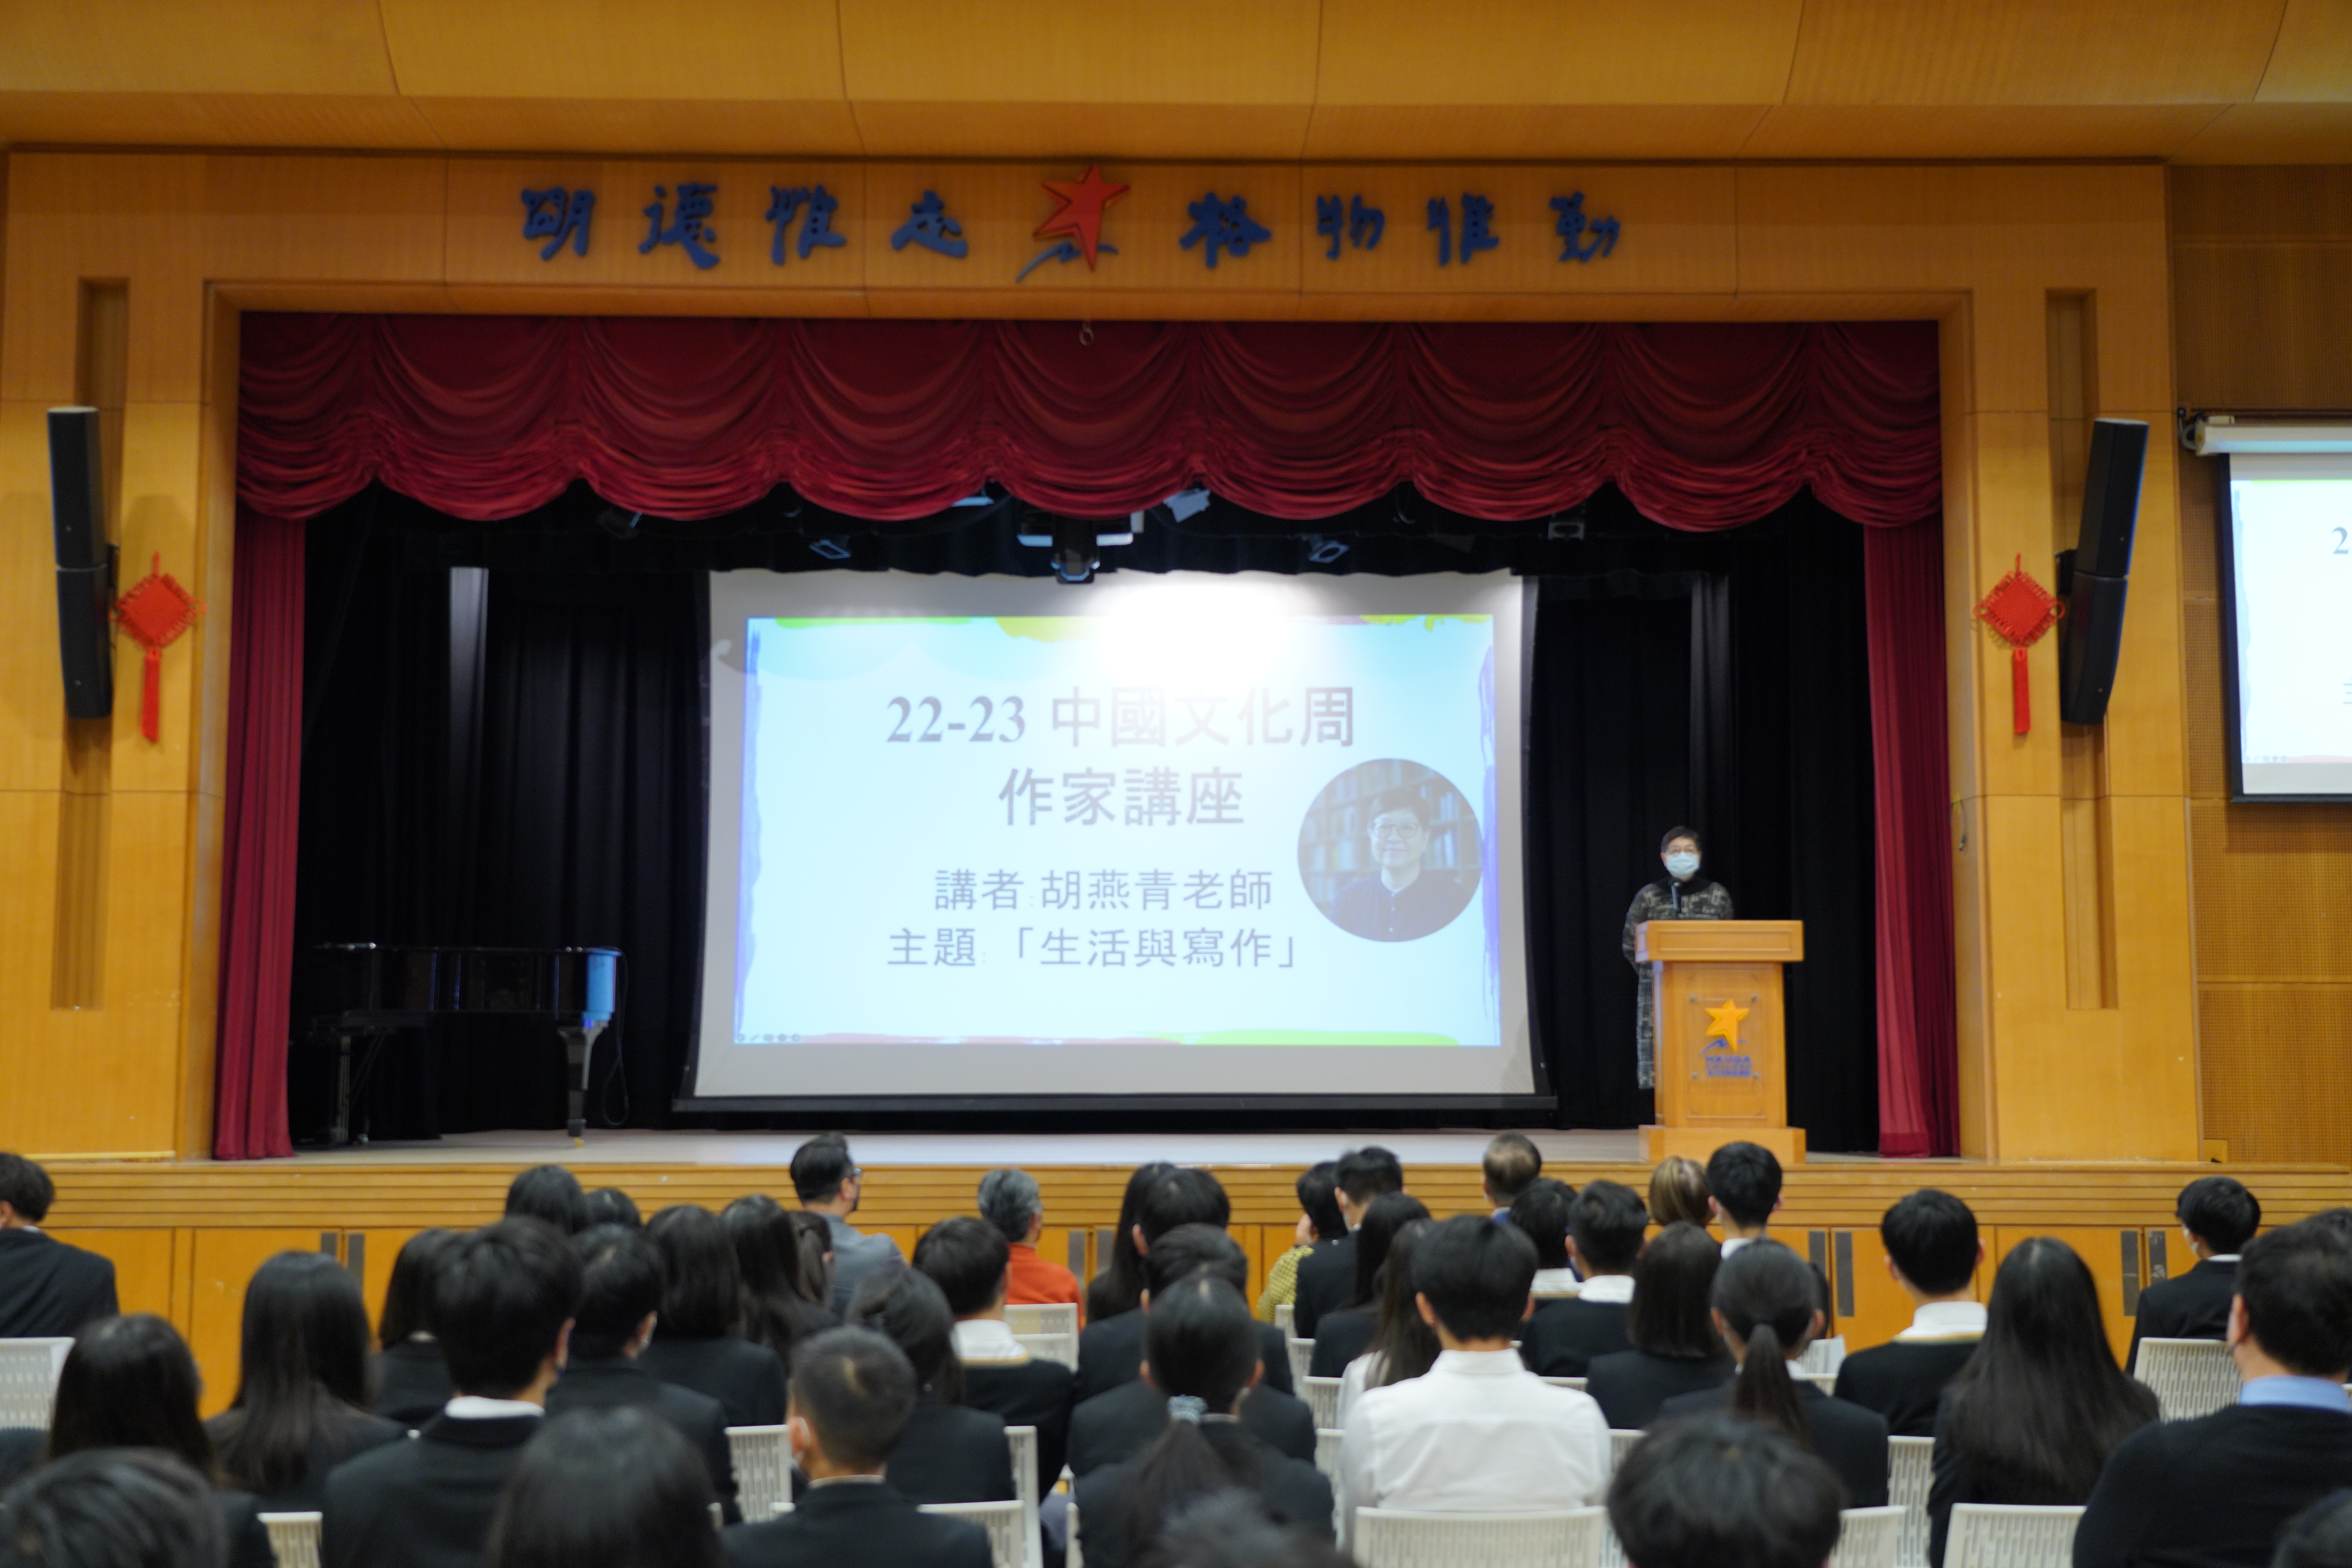 Chinese Culture Week - A Talk by Ms. Ms. Wu Yin Ching